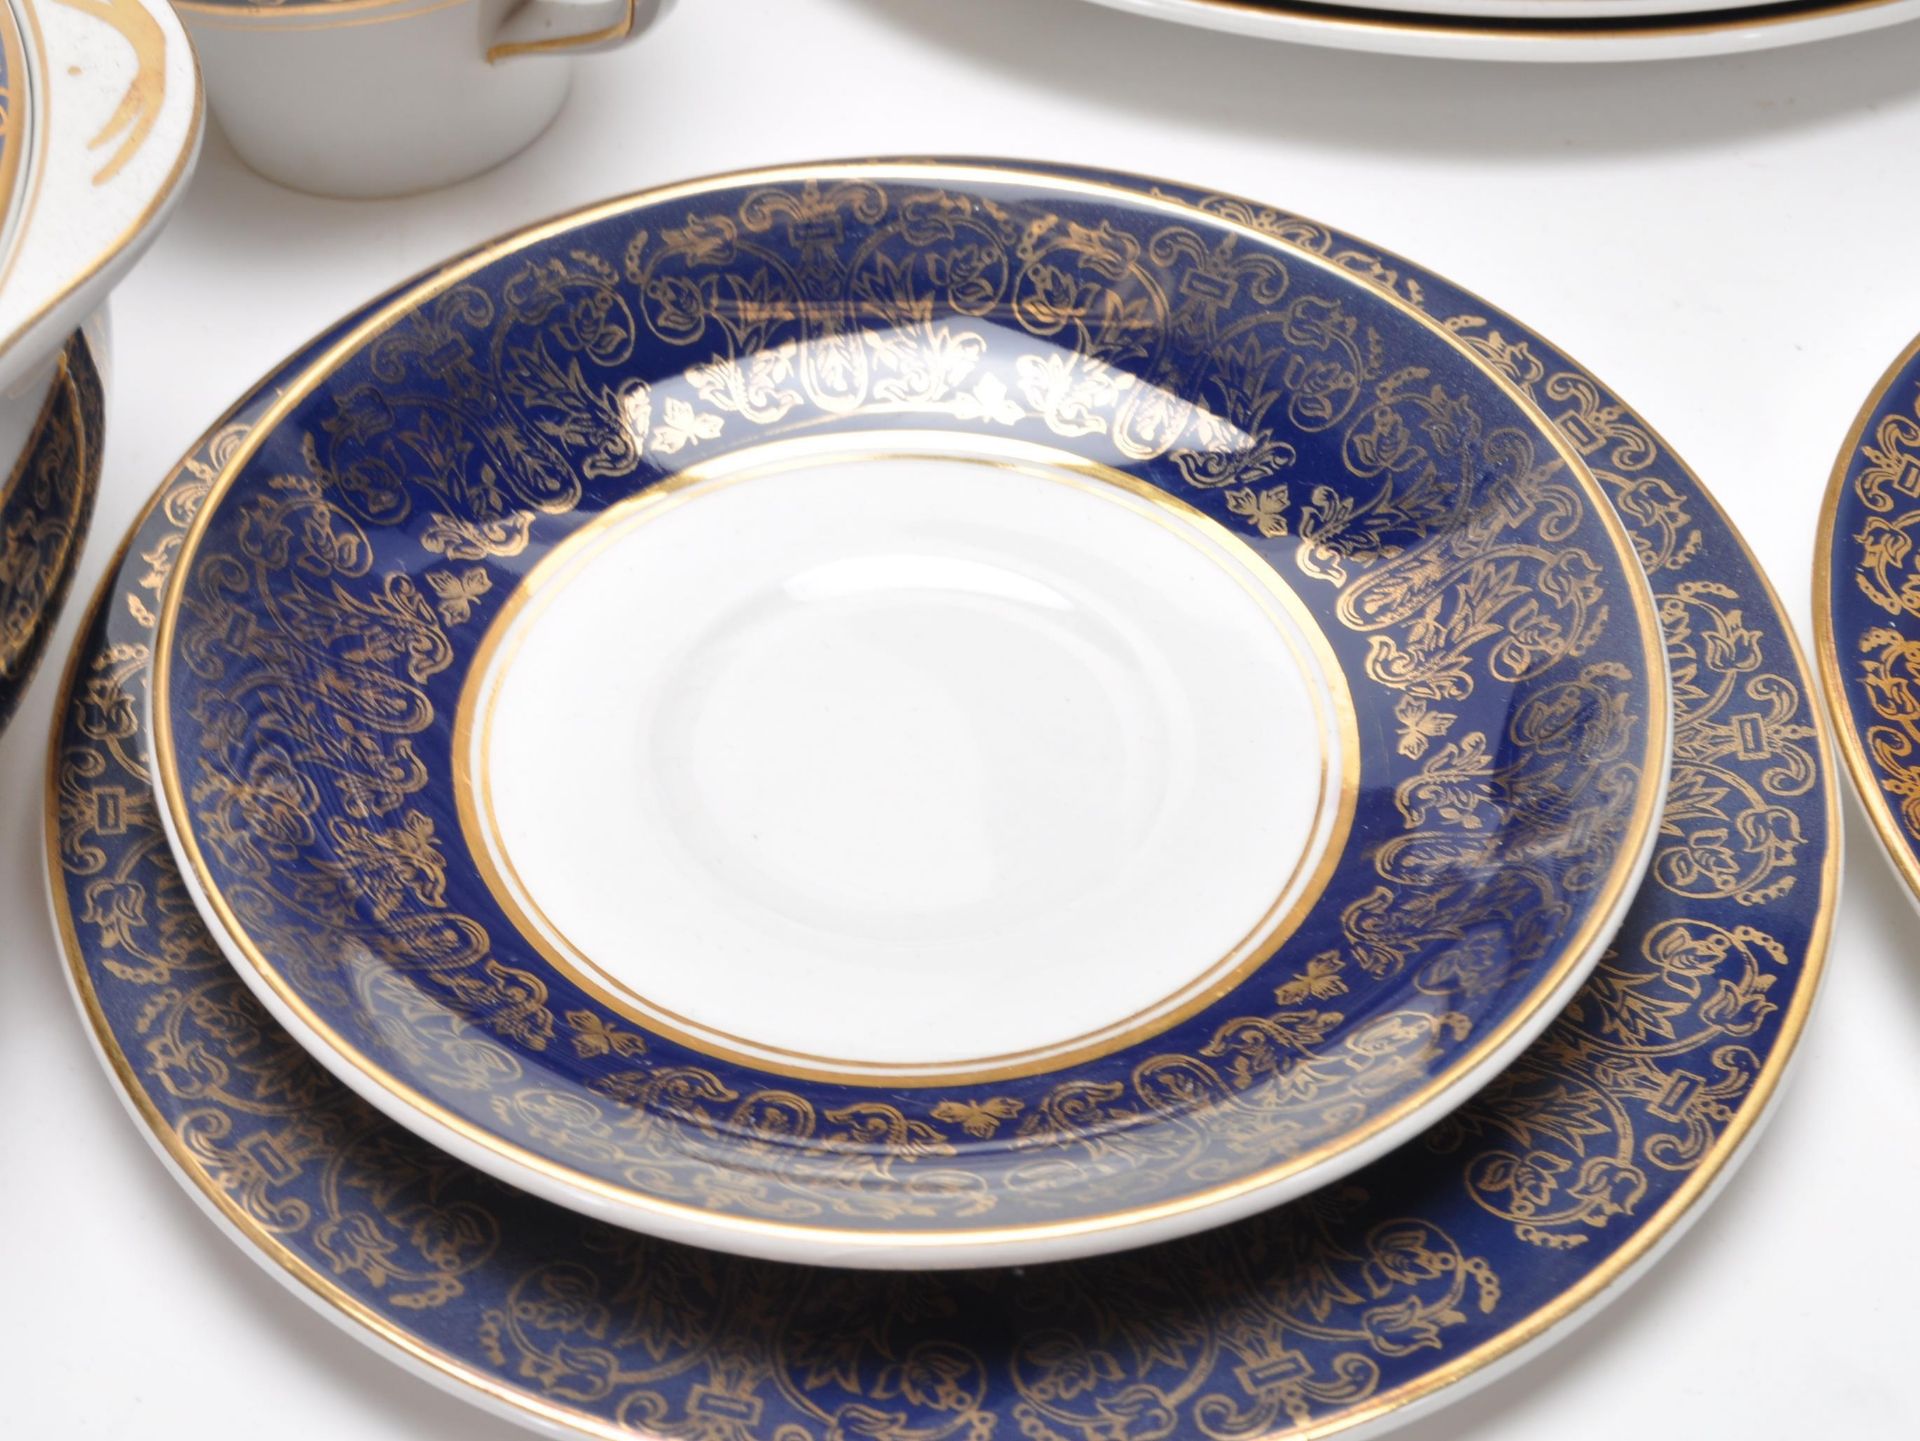 WOOD & SONS ALPINE WHITE IRONSTONE DINNER SERVICE - Image 10 of 19